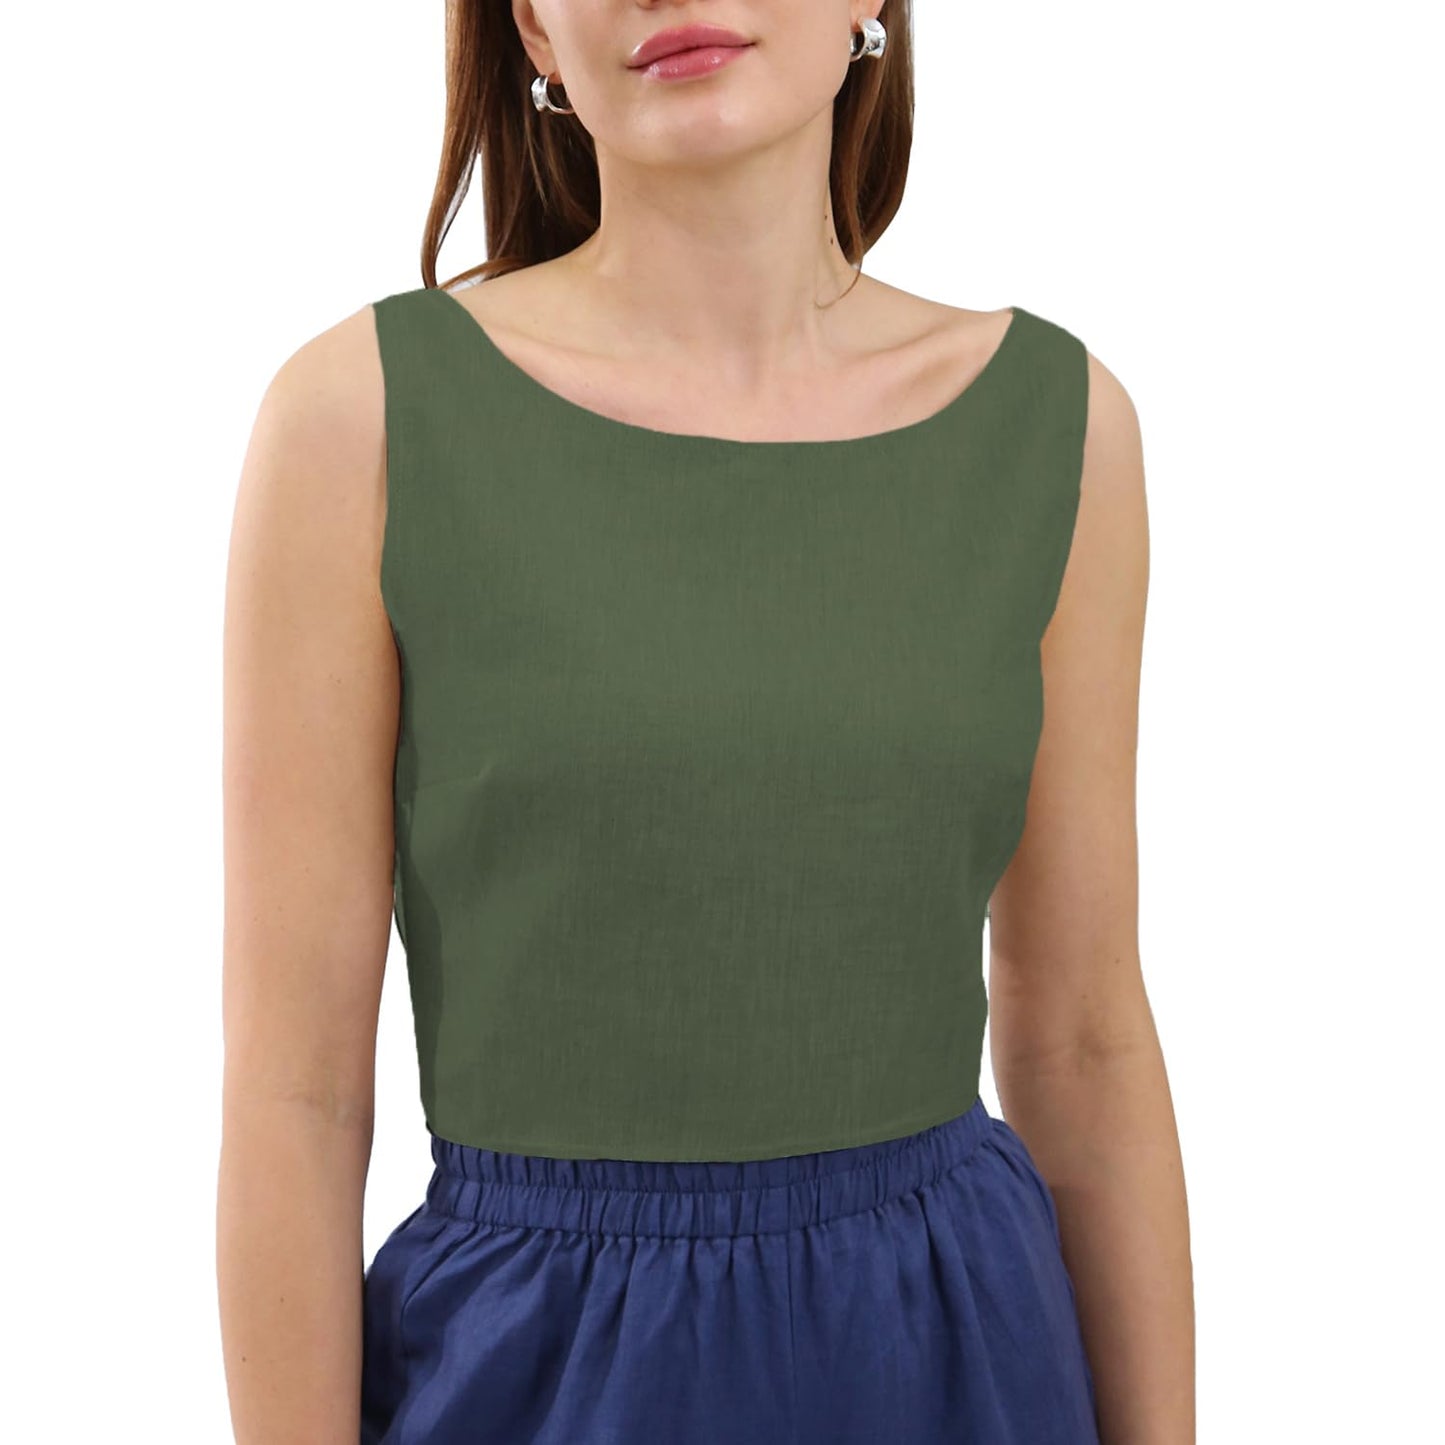 NTG Fad 100% Linen Crop Top with Open Back and Back Tie